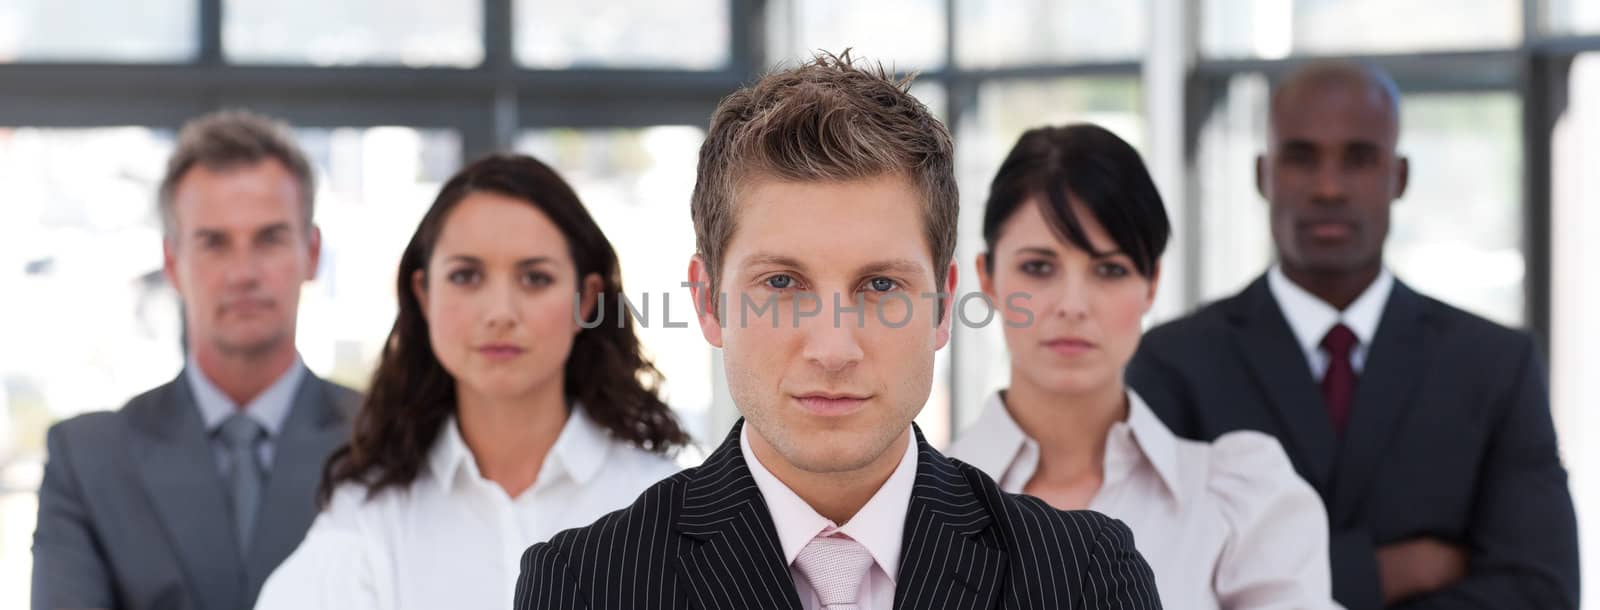 Portrait of a united business team looking at the camera in a office